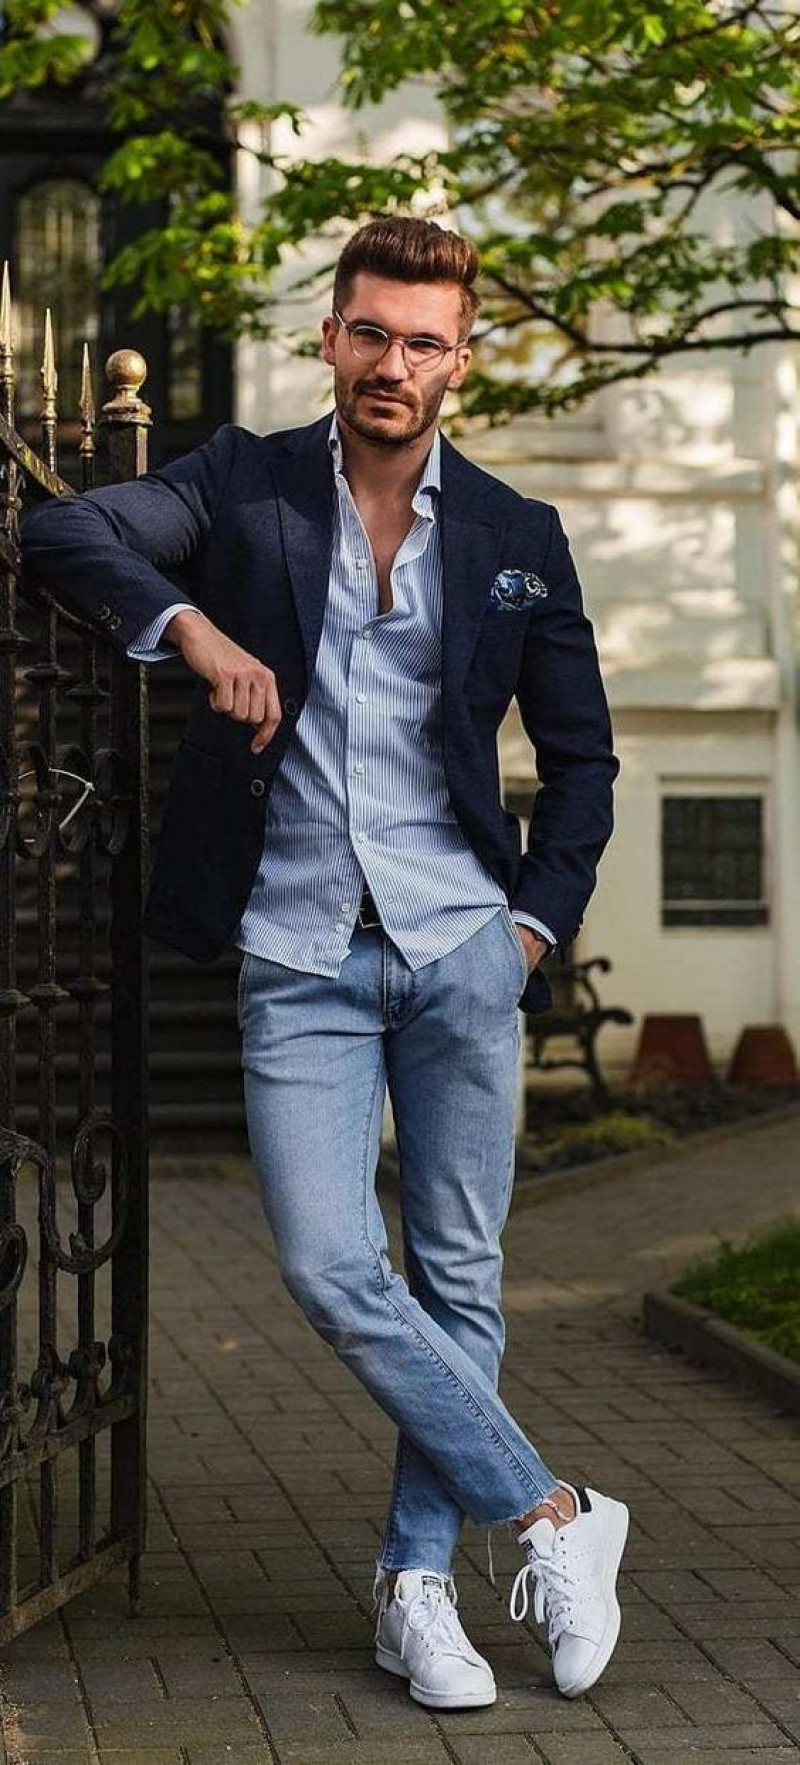 jeans and blazer outfit men, business casual, men's style, light blue casual trouser, white sneaker